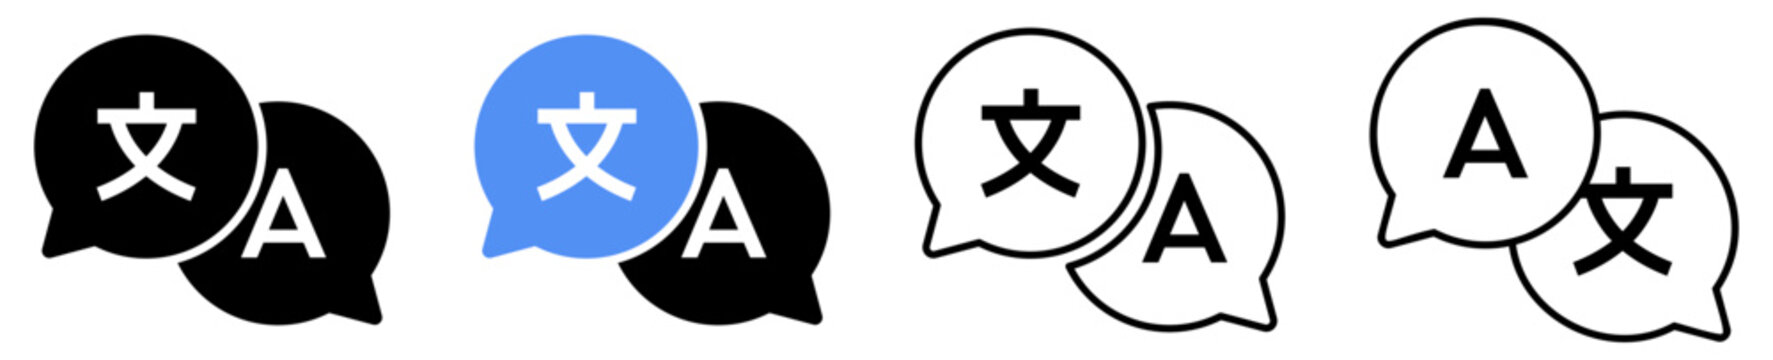 Set of icon for translator. Chat bubbles with language translation icons in different styles.